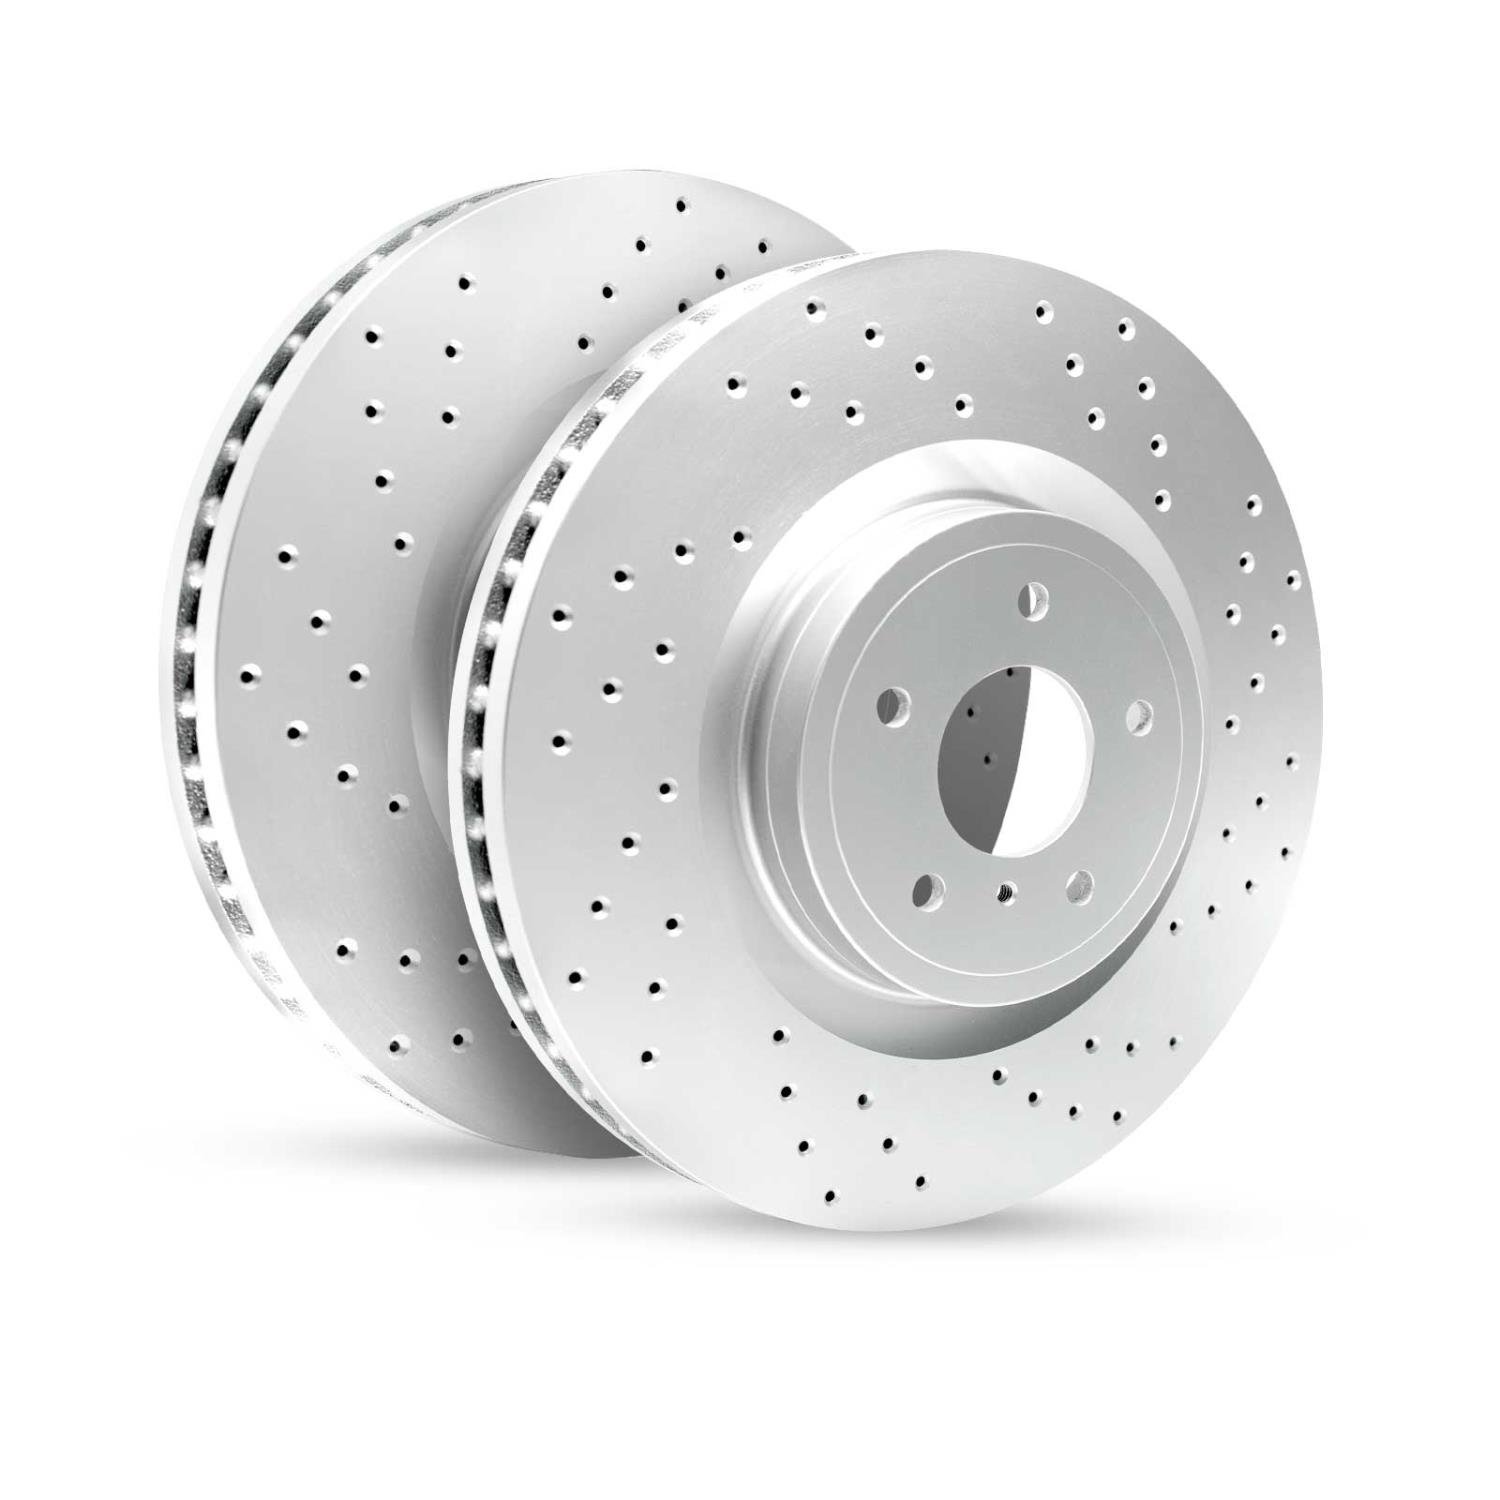 GEO-Carbon Drilled/Slotted Rotors, 1989-2013 Fits Multiple Makes/Models, Position: Front